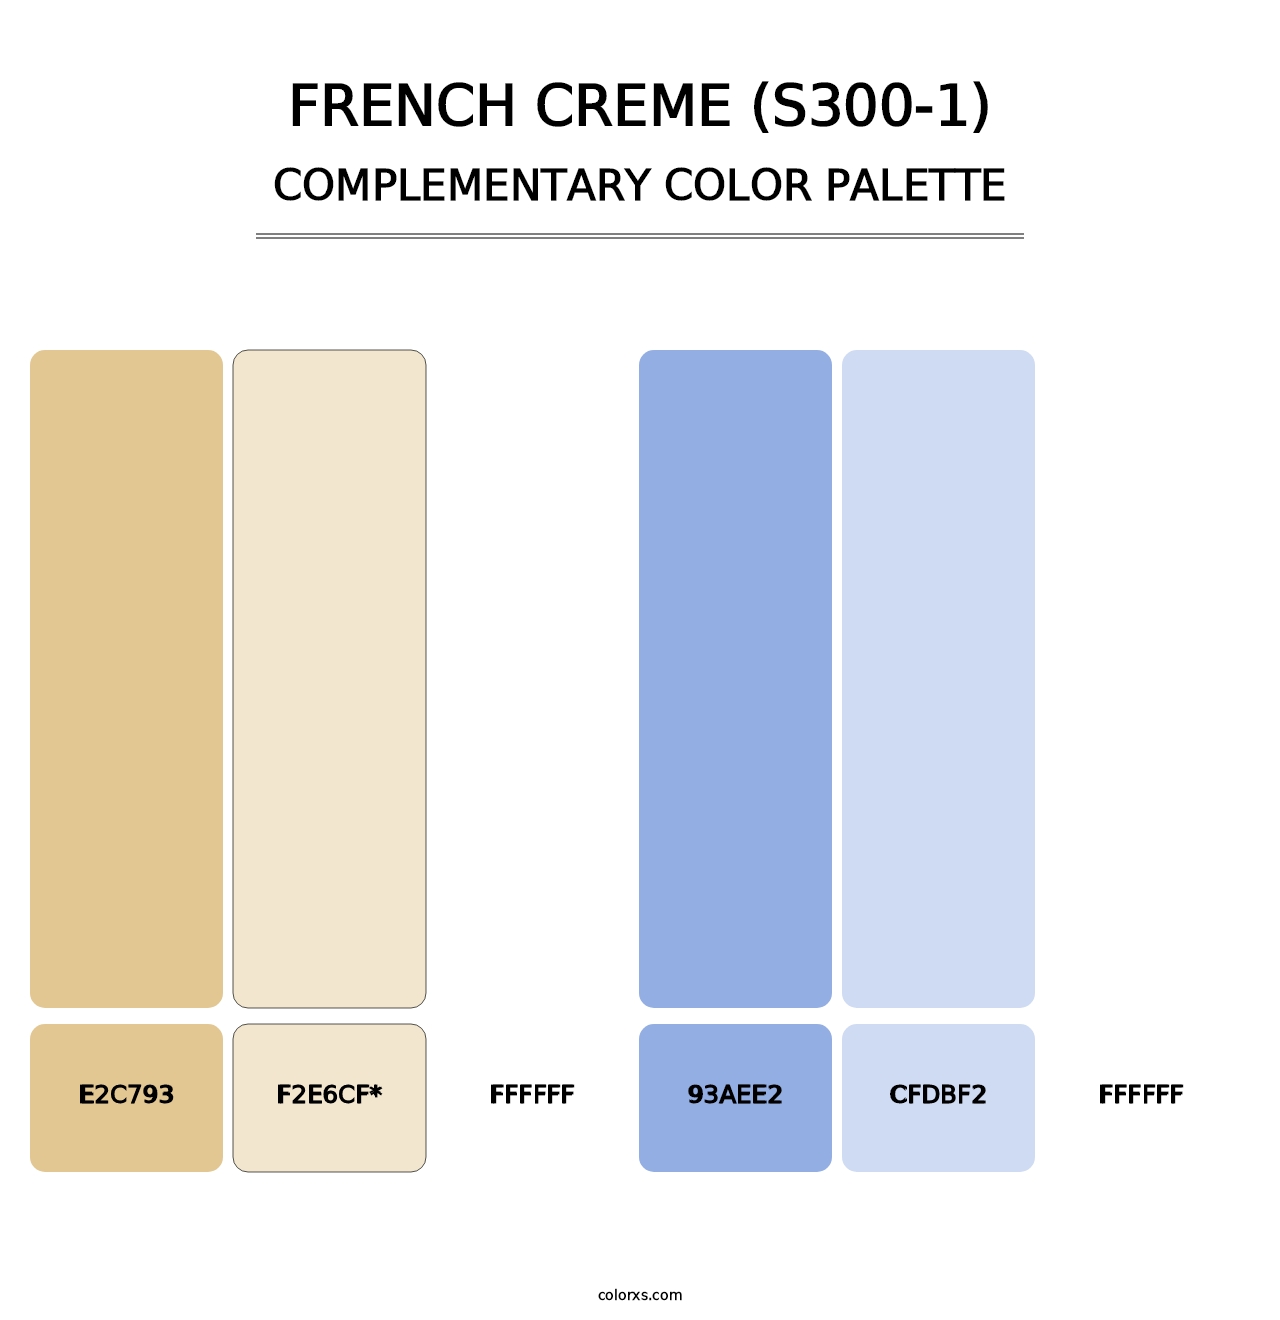 French Creme (S300-1) - Complementary Color Palette